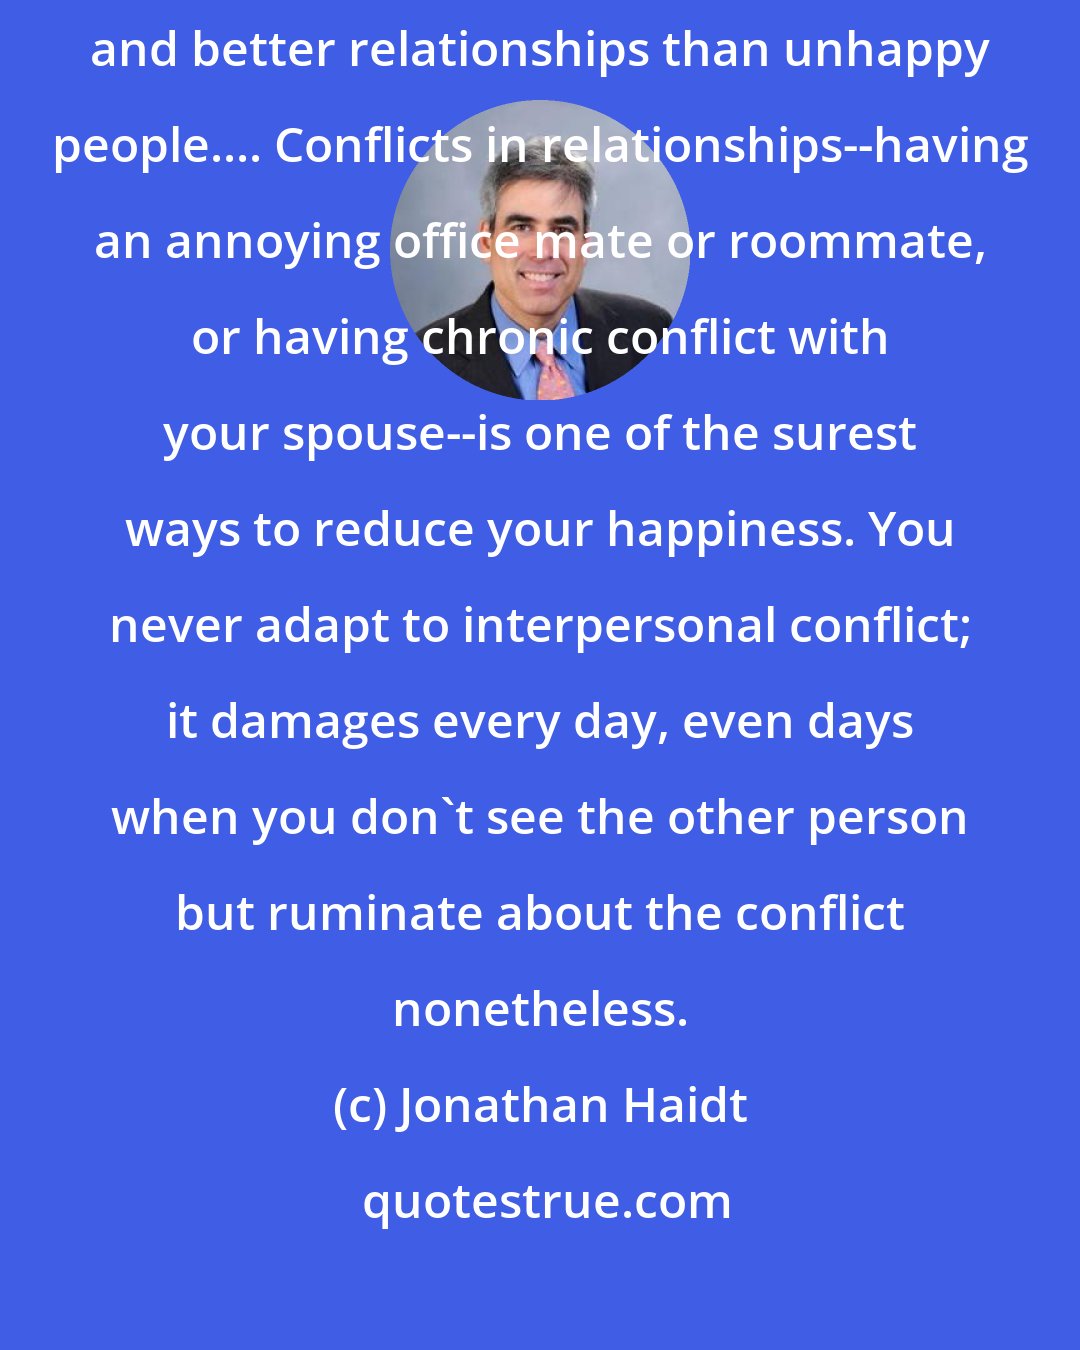 Jonathan Haidt: Good relationships make people happy, and happy people enjoy more and better relationships than unhappy people.... Conflicts in relationships--having an annoying office mate or roommate, or having chronic conflict with your spouse--is one of the surest ways to reduce your happiness. You never adapt to interpersonal conflict; it damages every day, even days when you don't see the other person but ruminate about the conflict nonetheless.